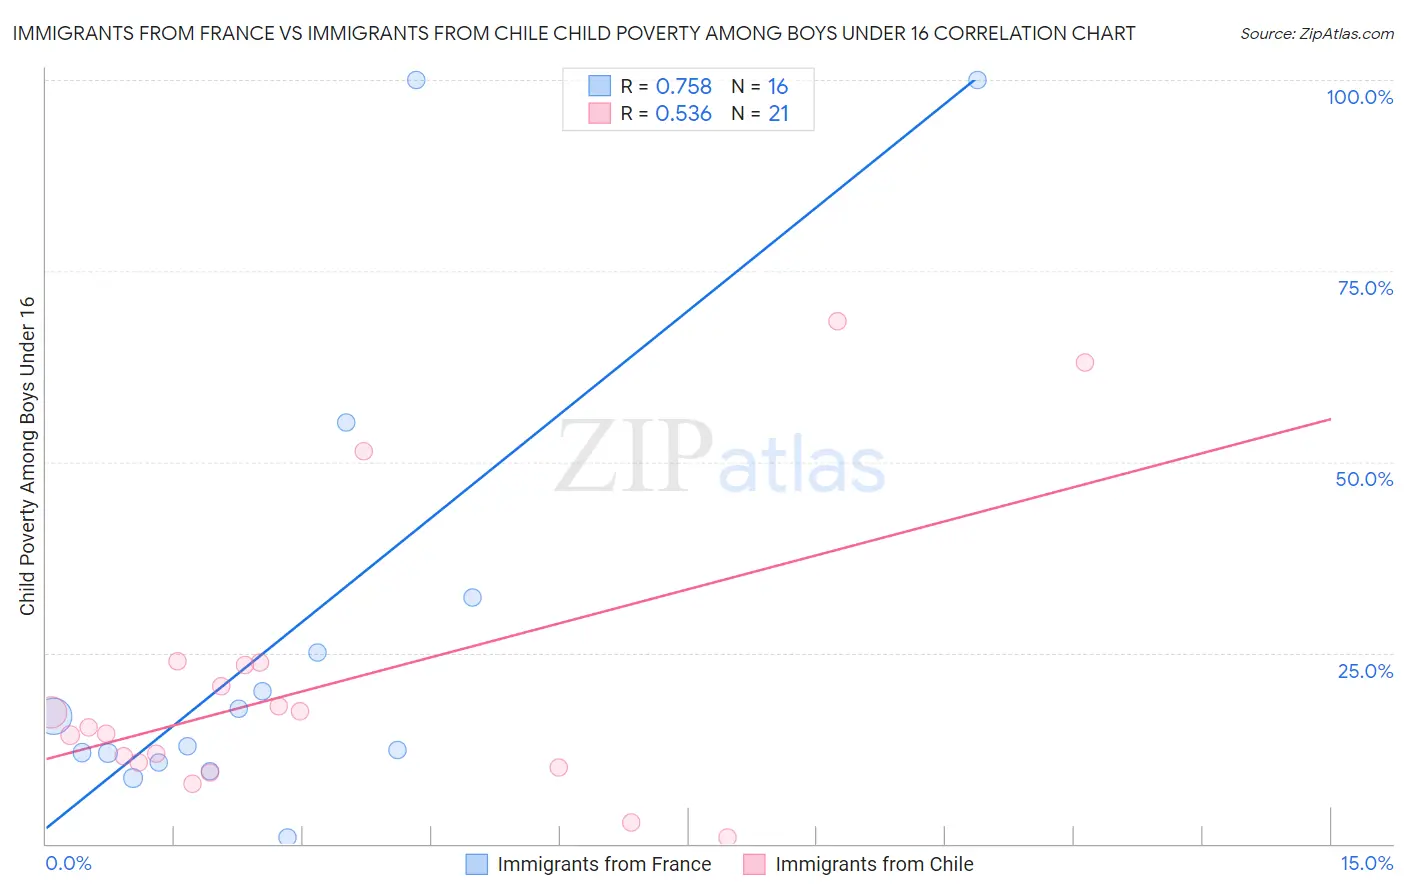 Immigrants from France vs Immigrants from Chile Child Poverty Among Boys Under 16